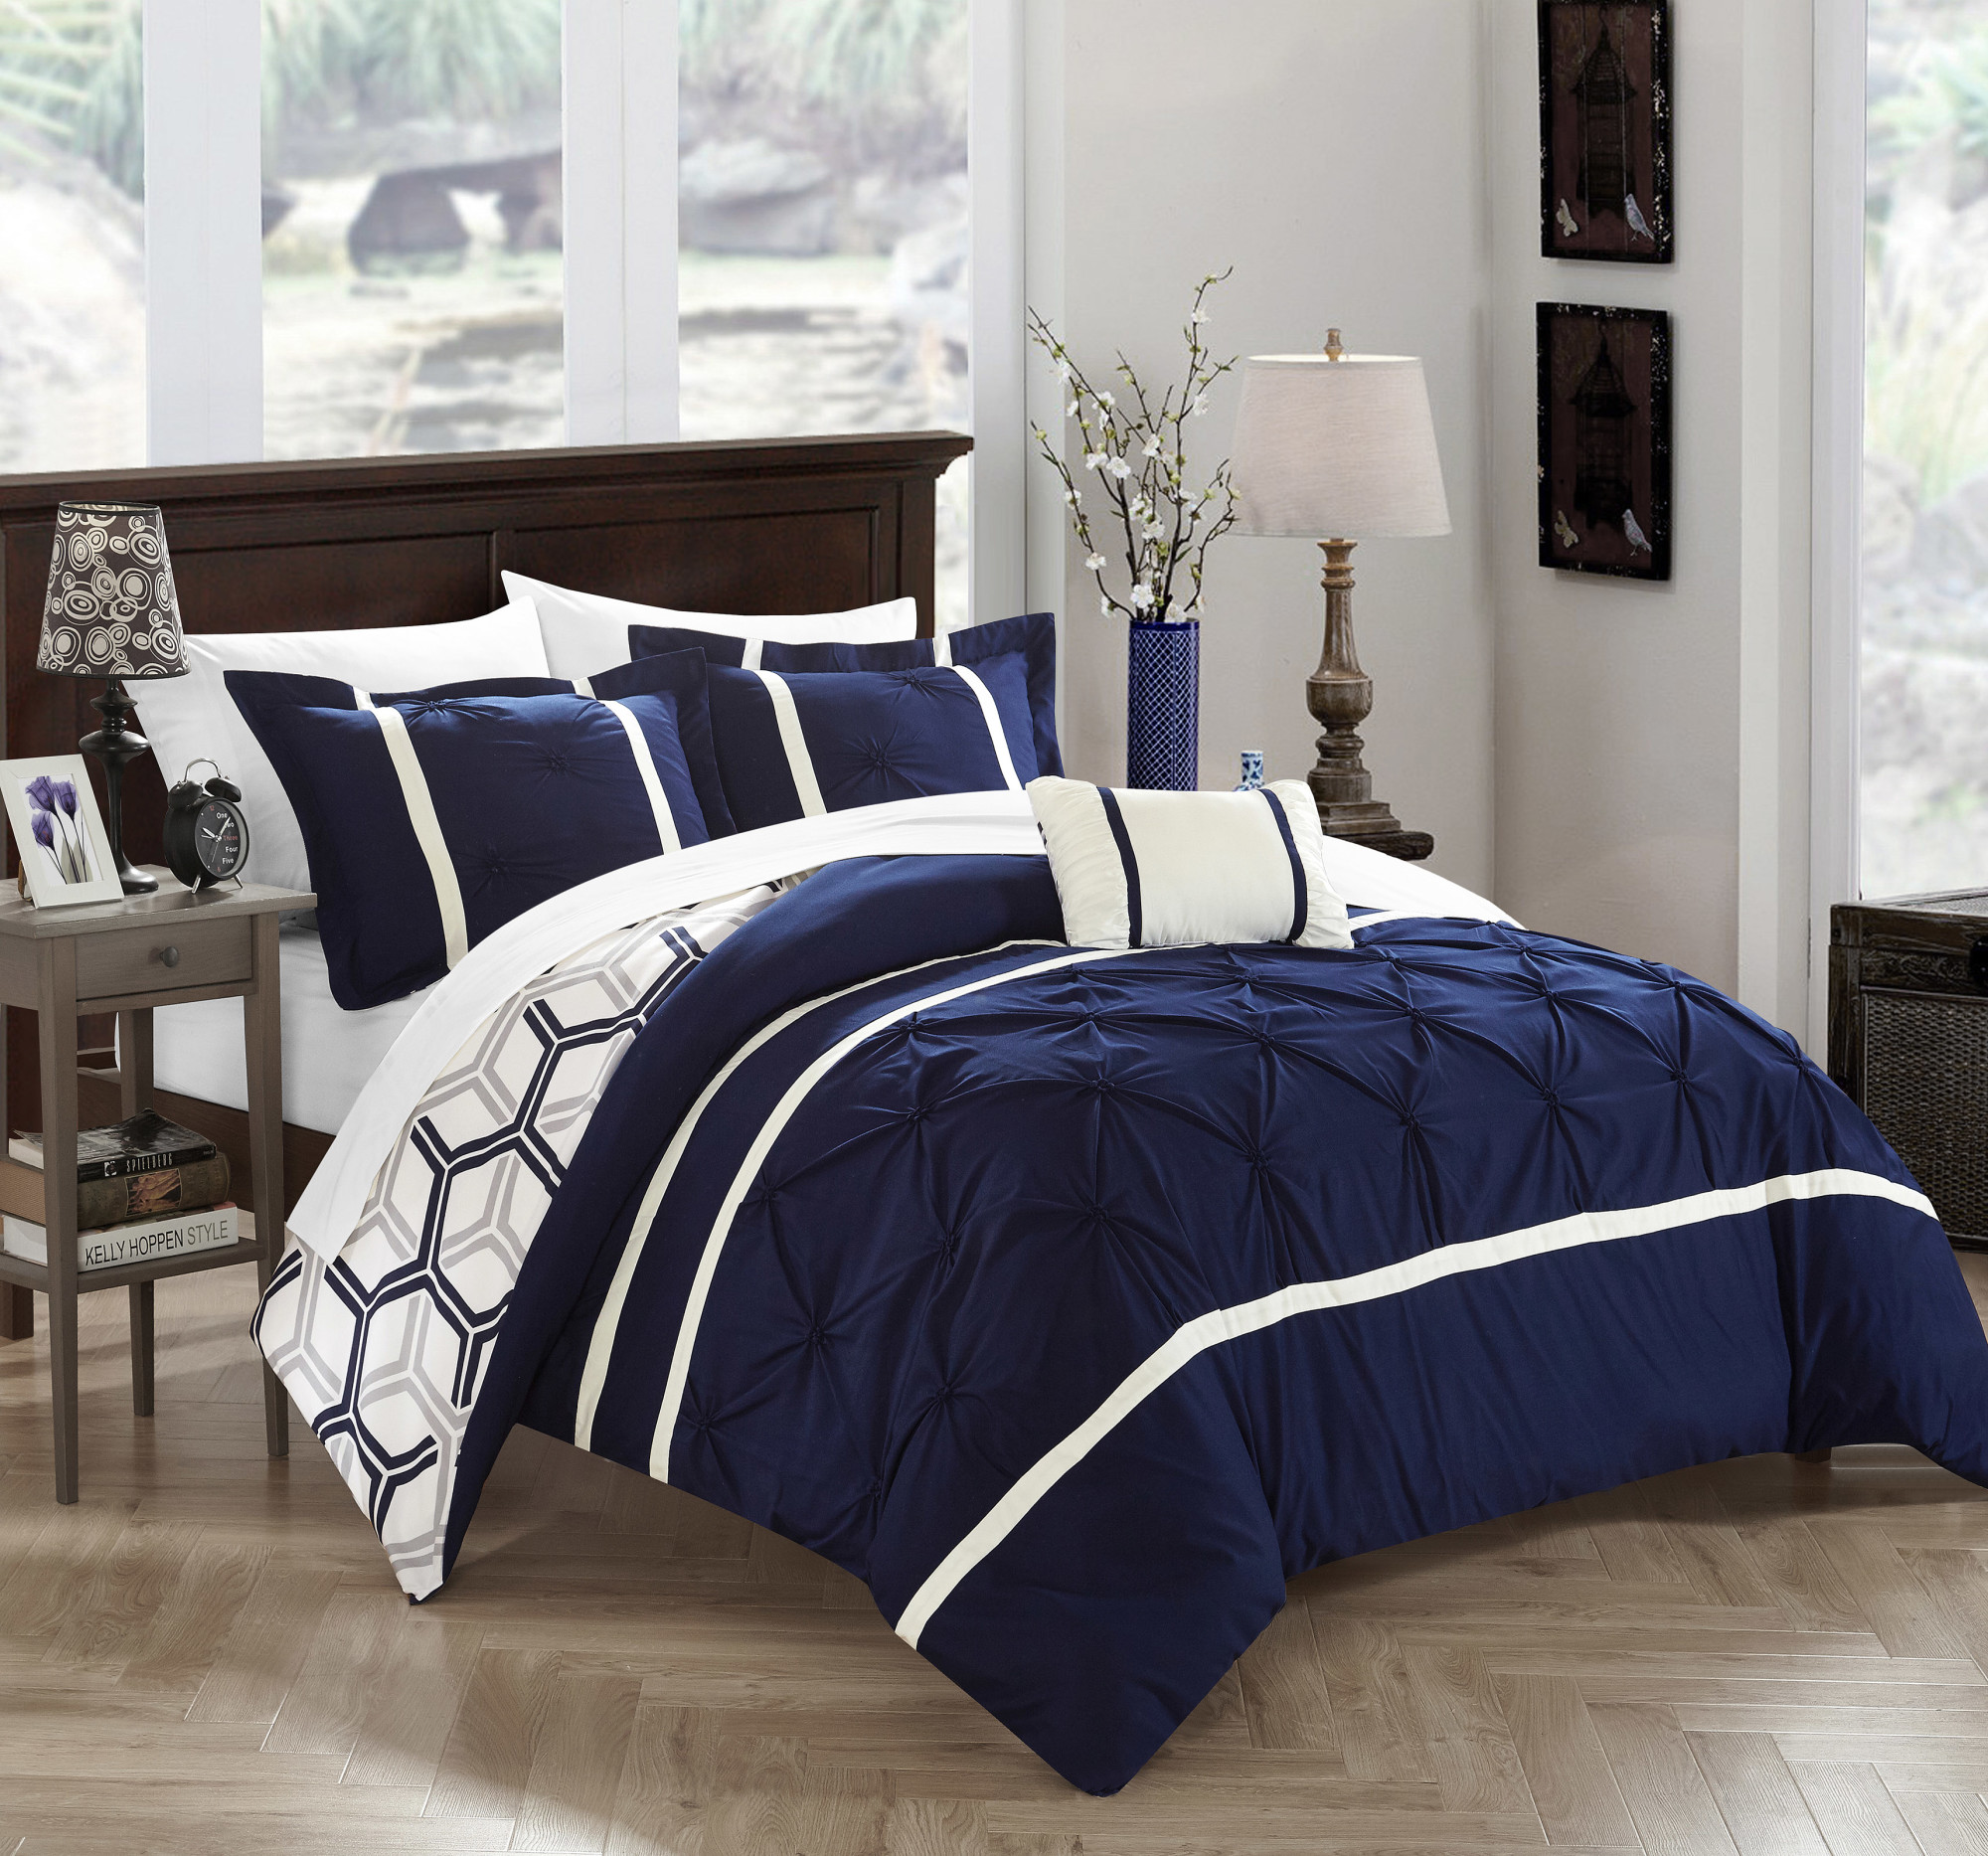 Chic Home Avee 3 or 4 Piece Reversible Comforter Set